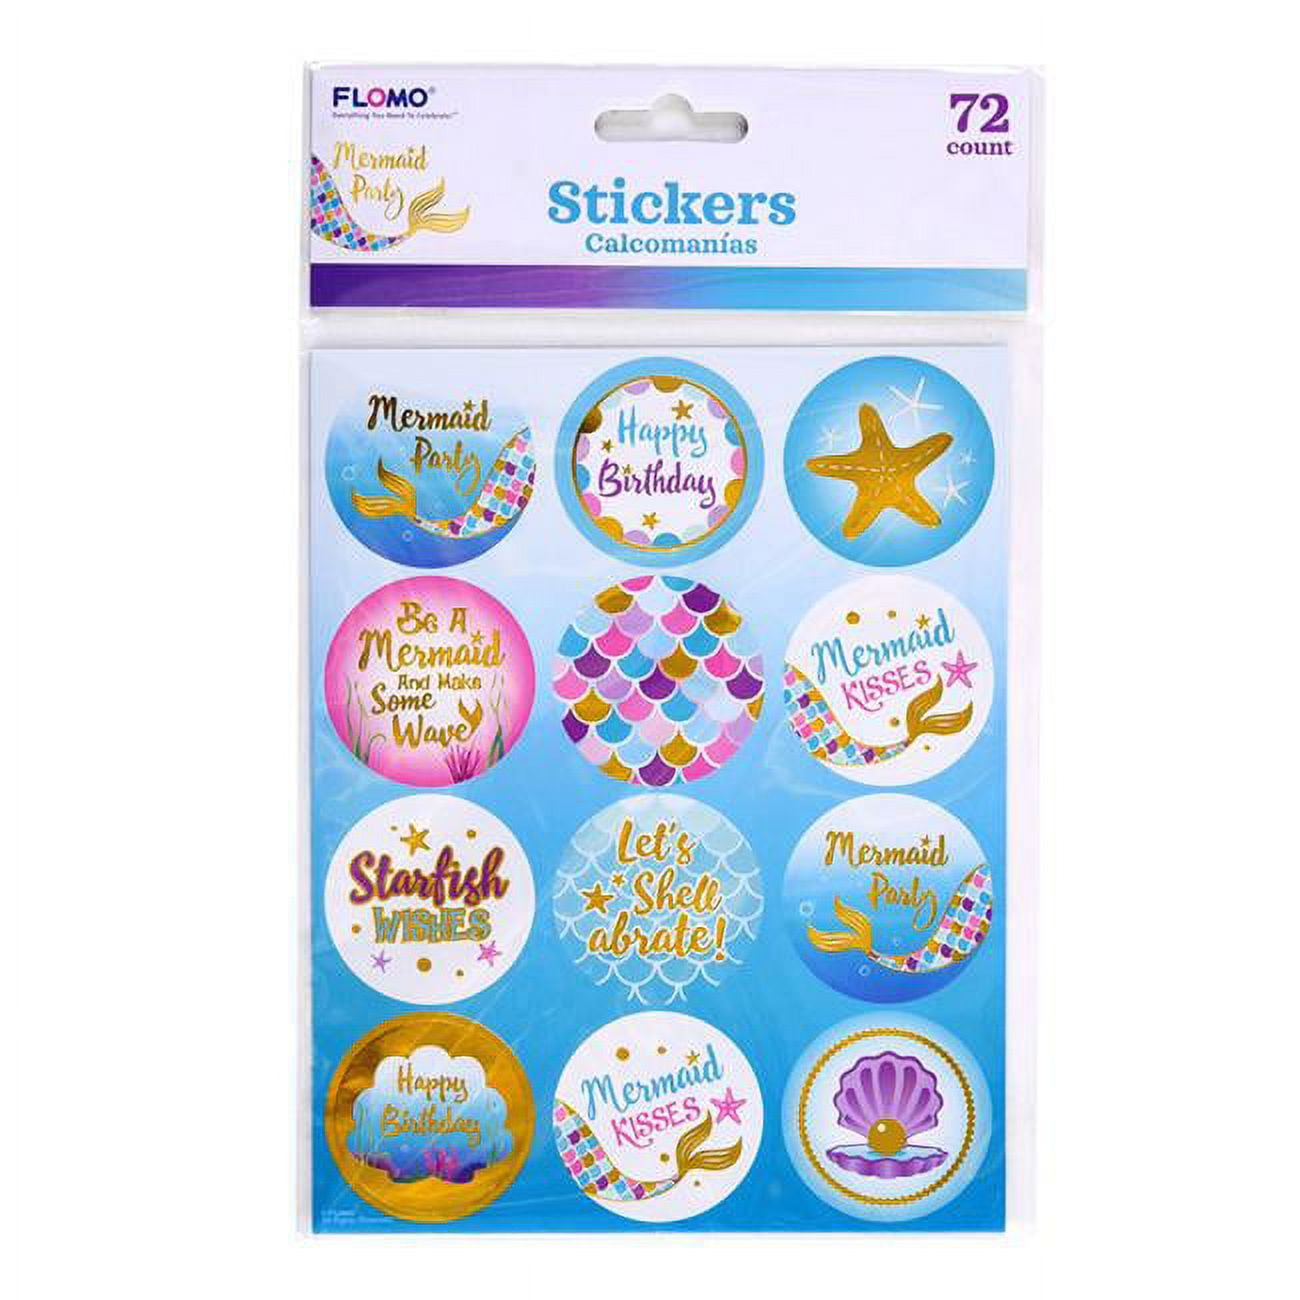 Picture of DDI 2340356 Mermaid Stickers - 72 Count Case of 36